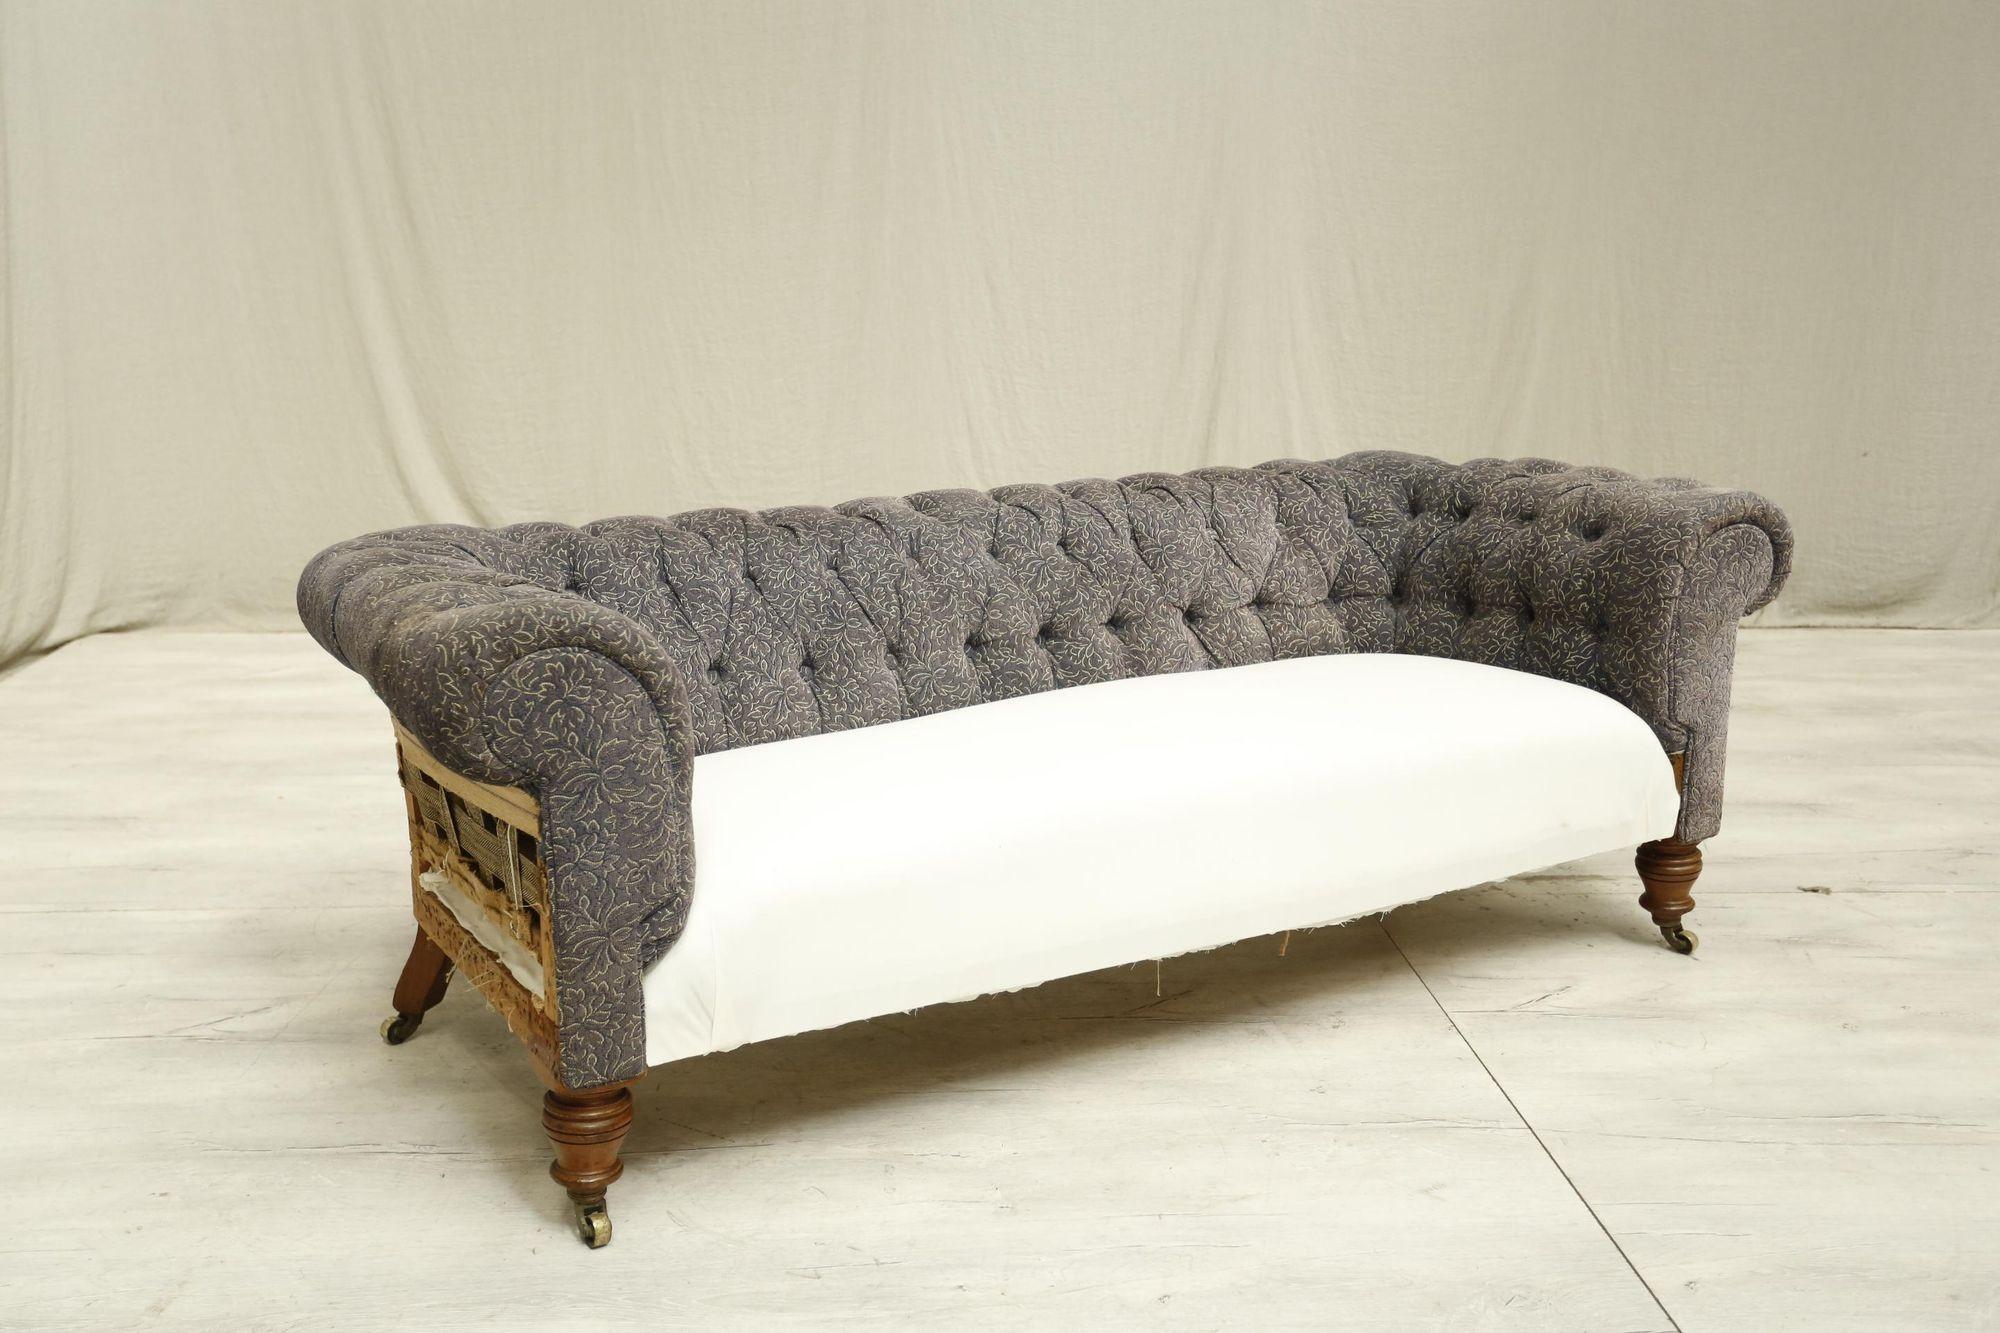 This is a superb quality 19th century English chesterfield sofa. It is a great size and very comfy. It has a fabulous buttoned back which will look very inviting when upholstered. The front legs are turned oak and capped with casters. The shape of